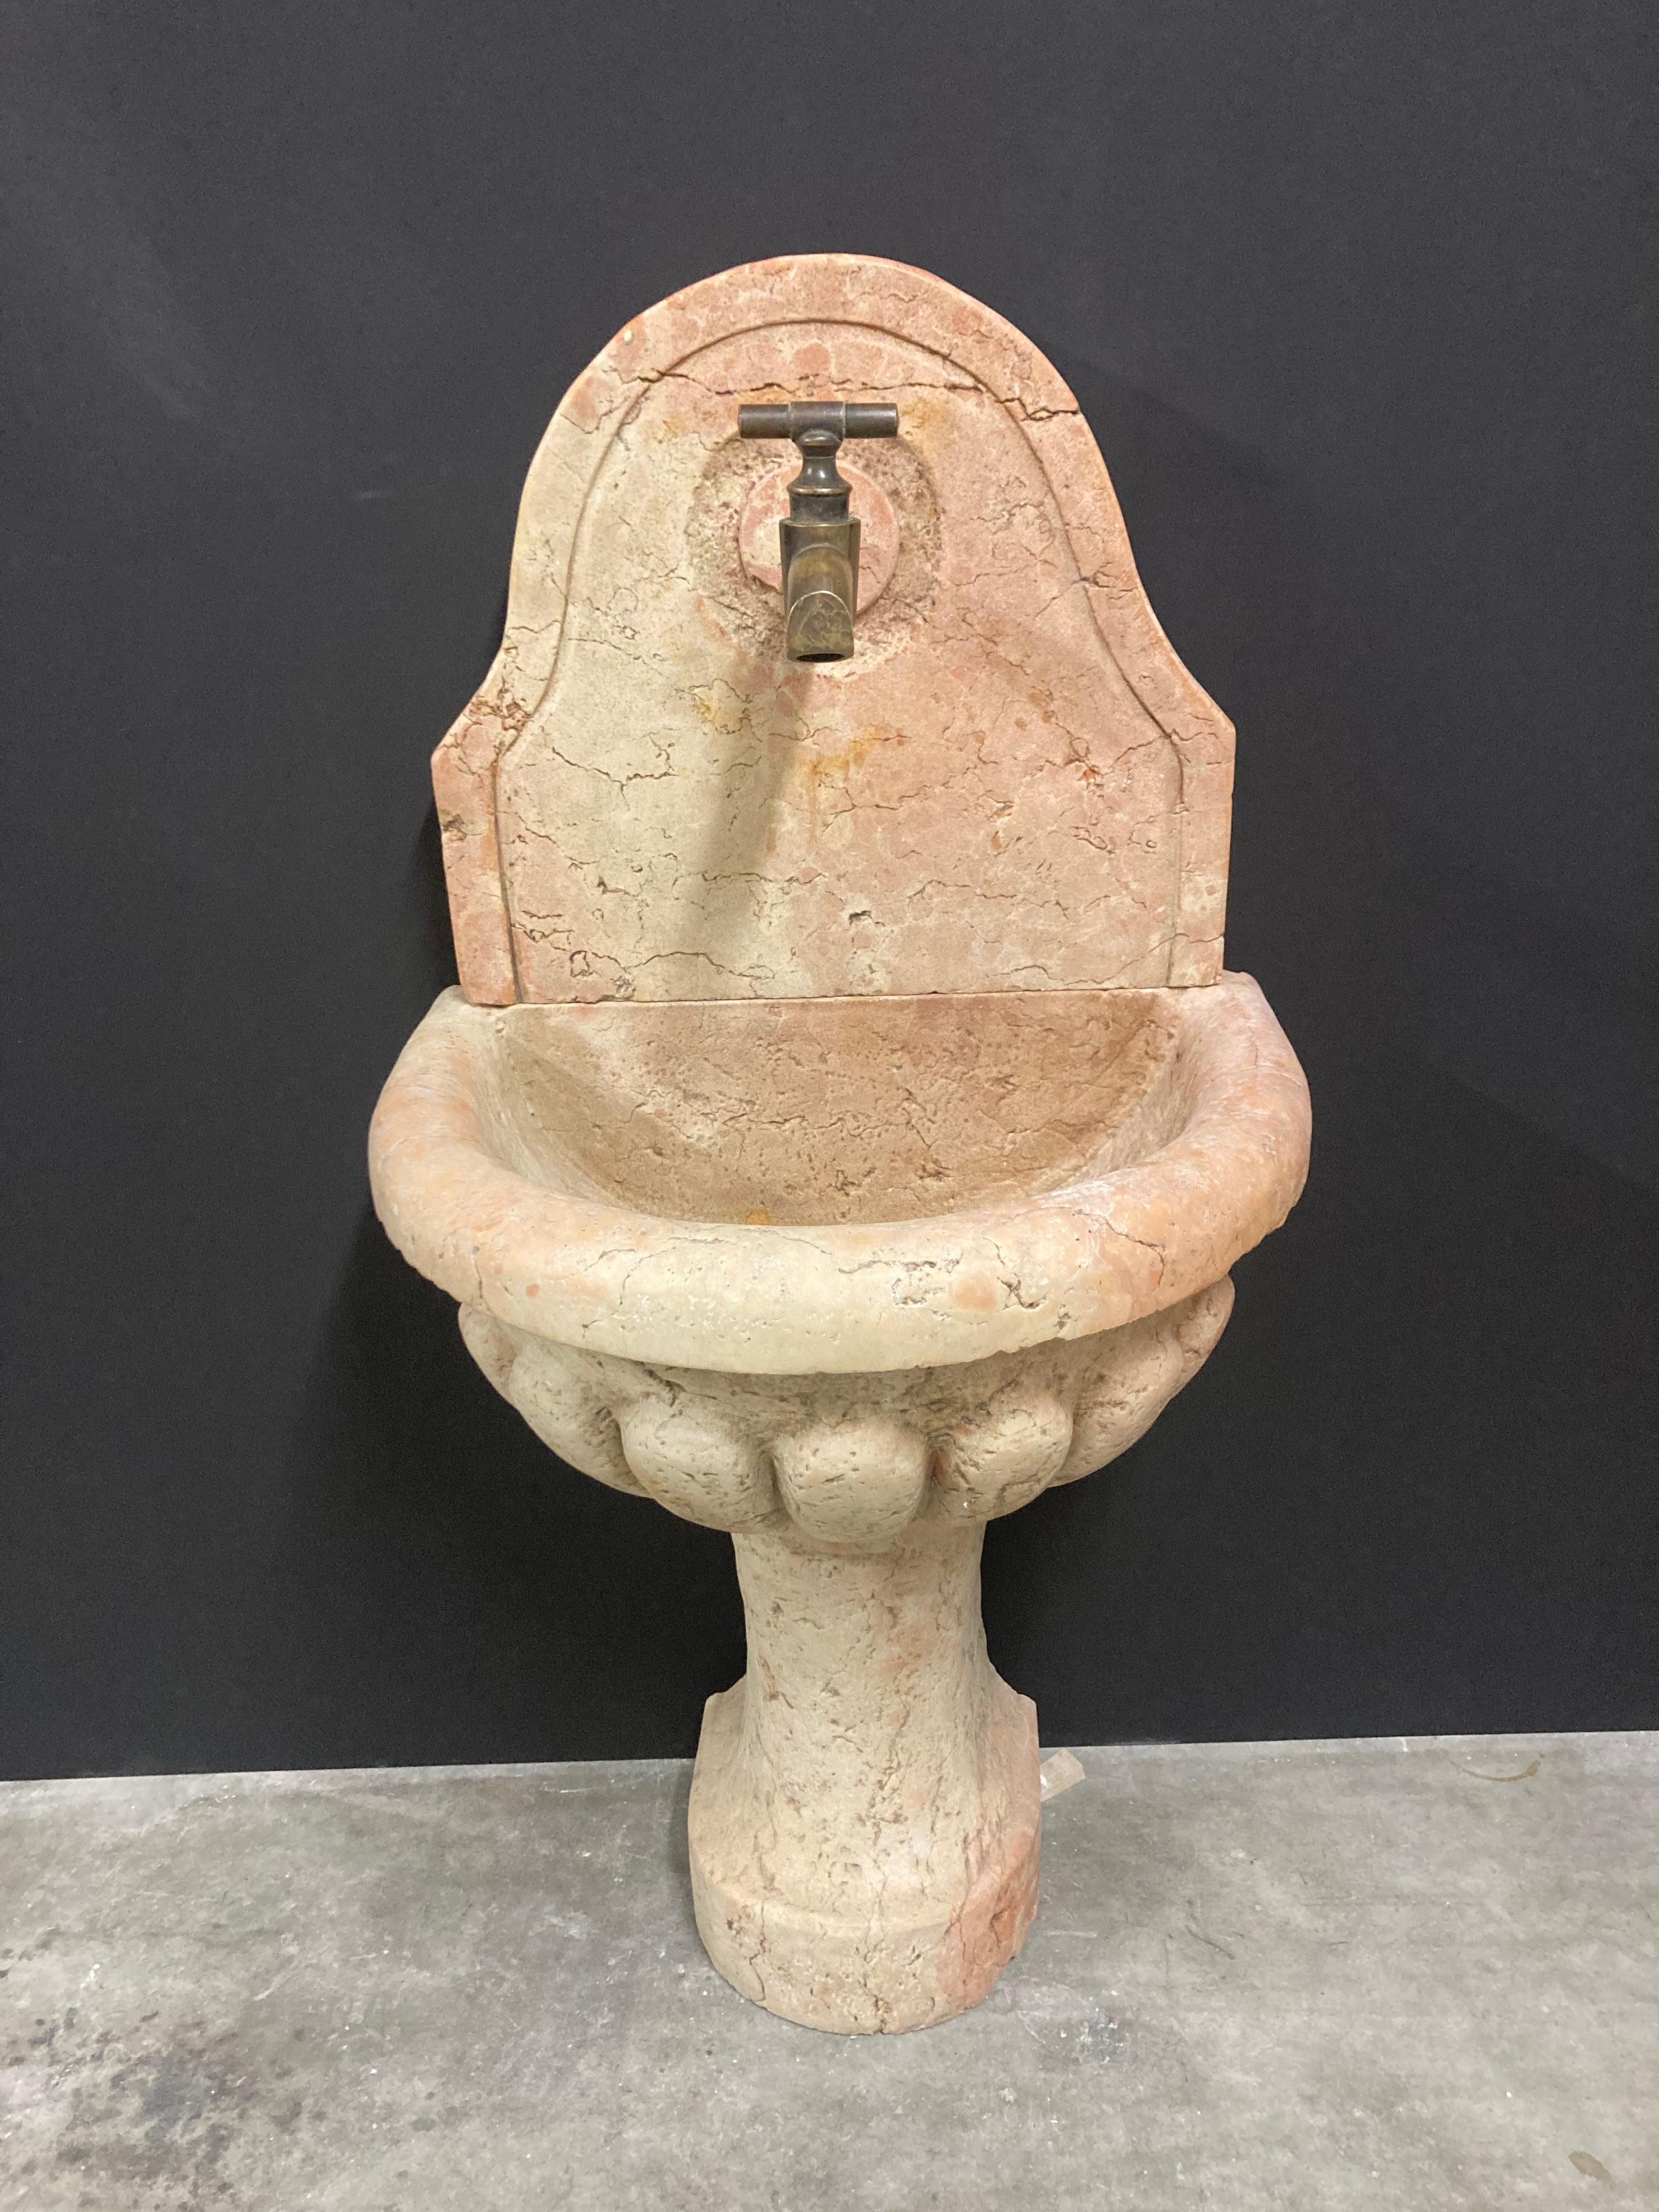 Happy to offer this antique Italian beautifully carved wall fountain or powder room sink.
This fountain dated from the 19th century and is made from marble quarried in Verrone, Piedmont, Italy. 

The marble’s color is mainly an ochre/tan color.